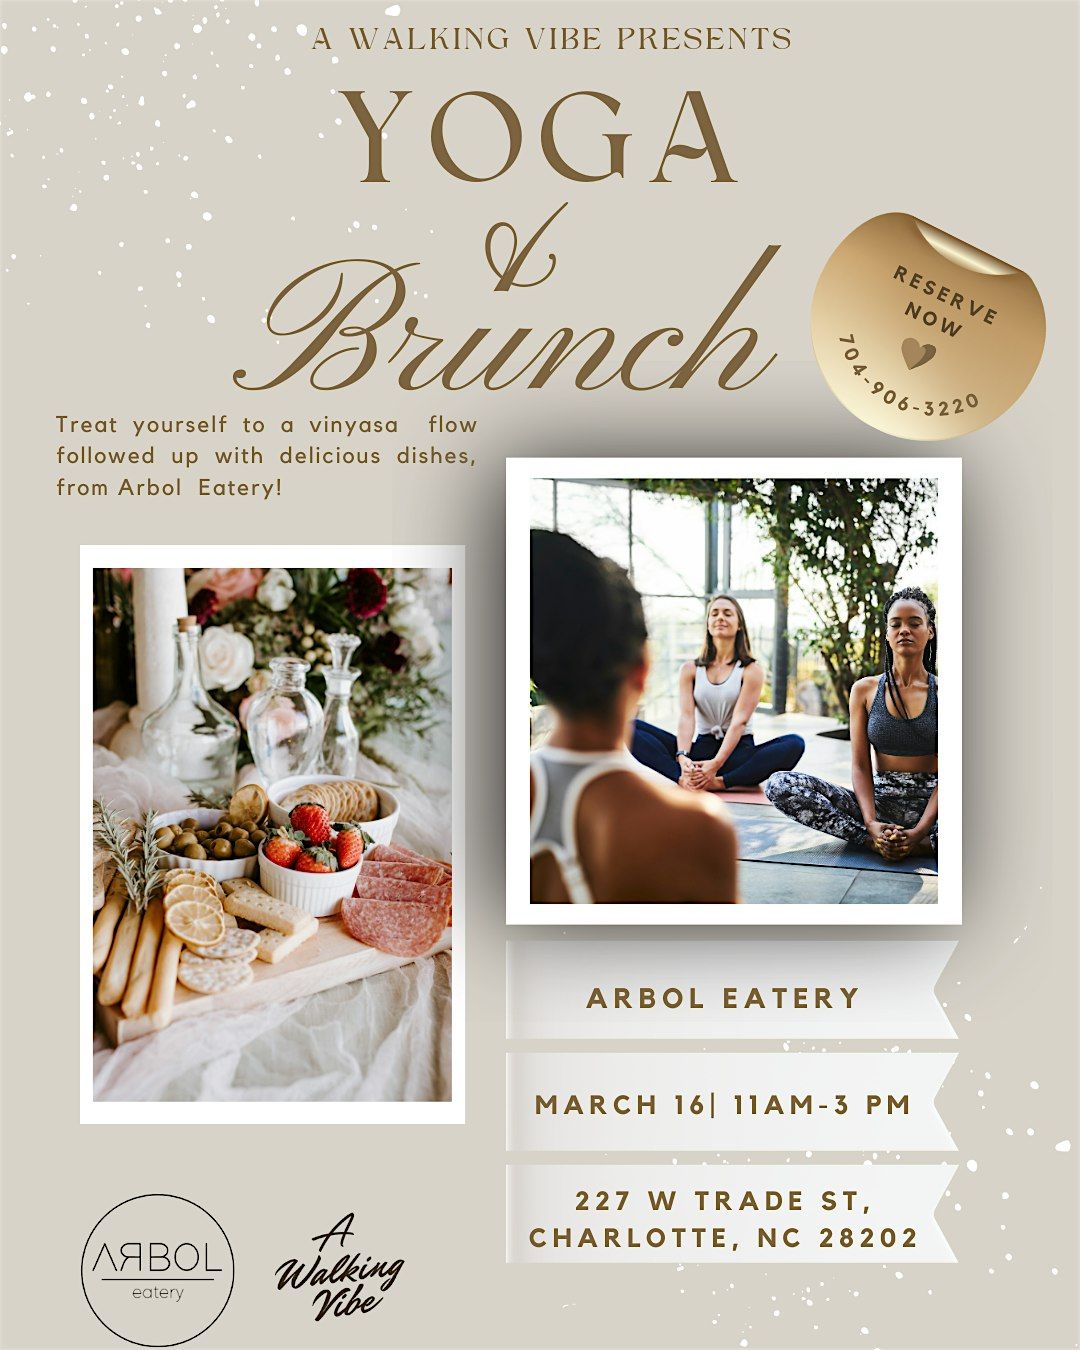 A Walking Vibe Presents: Yoga and Brunch at Arbol Eatery